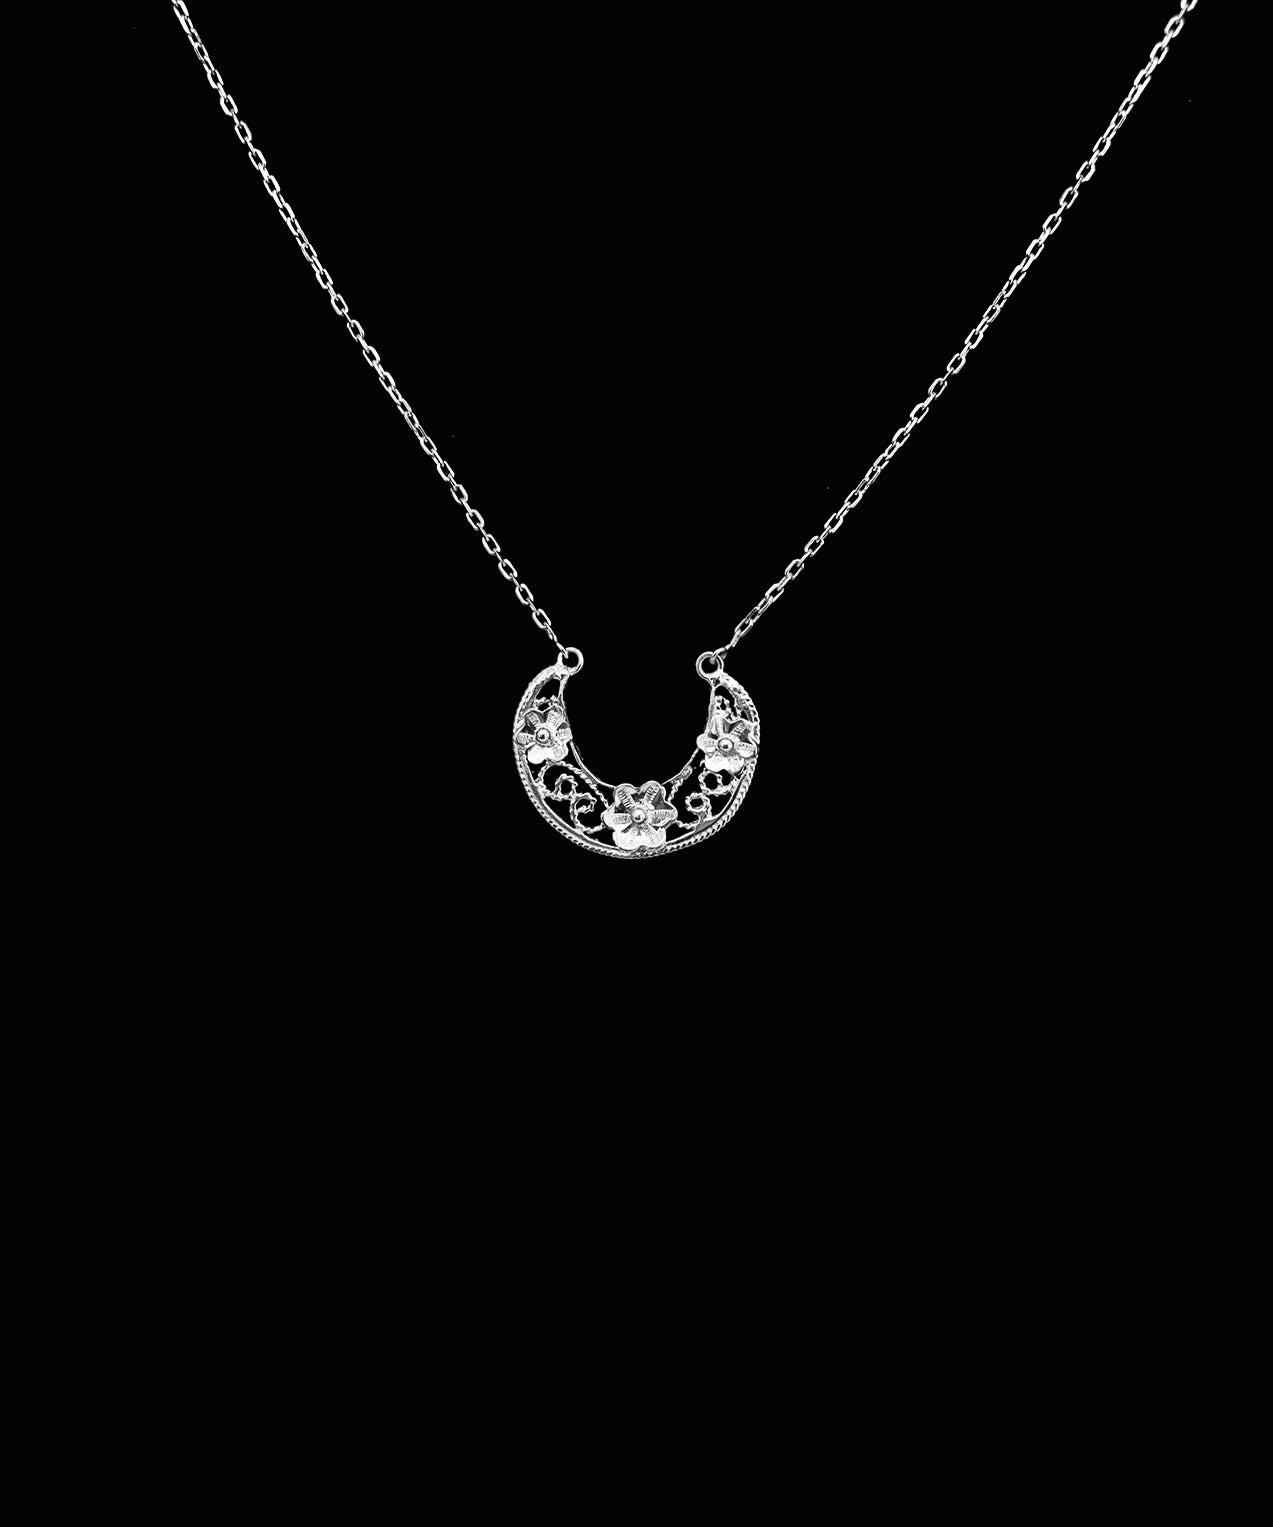 Young Moon Necklace